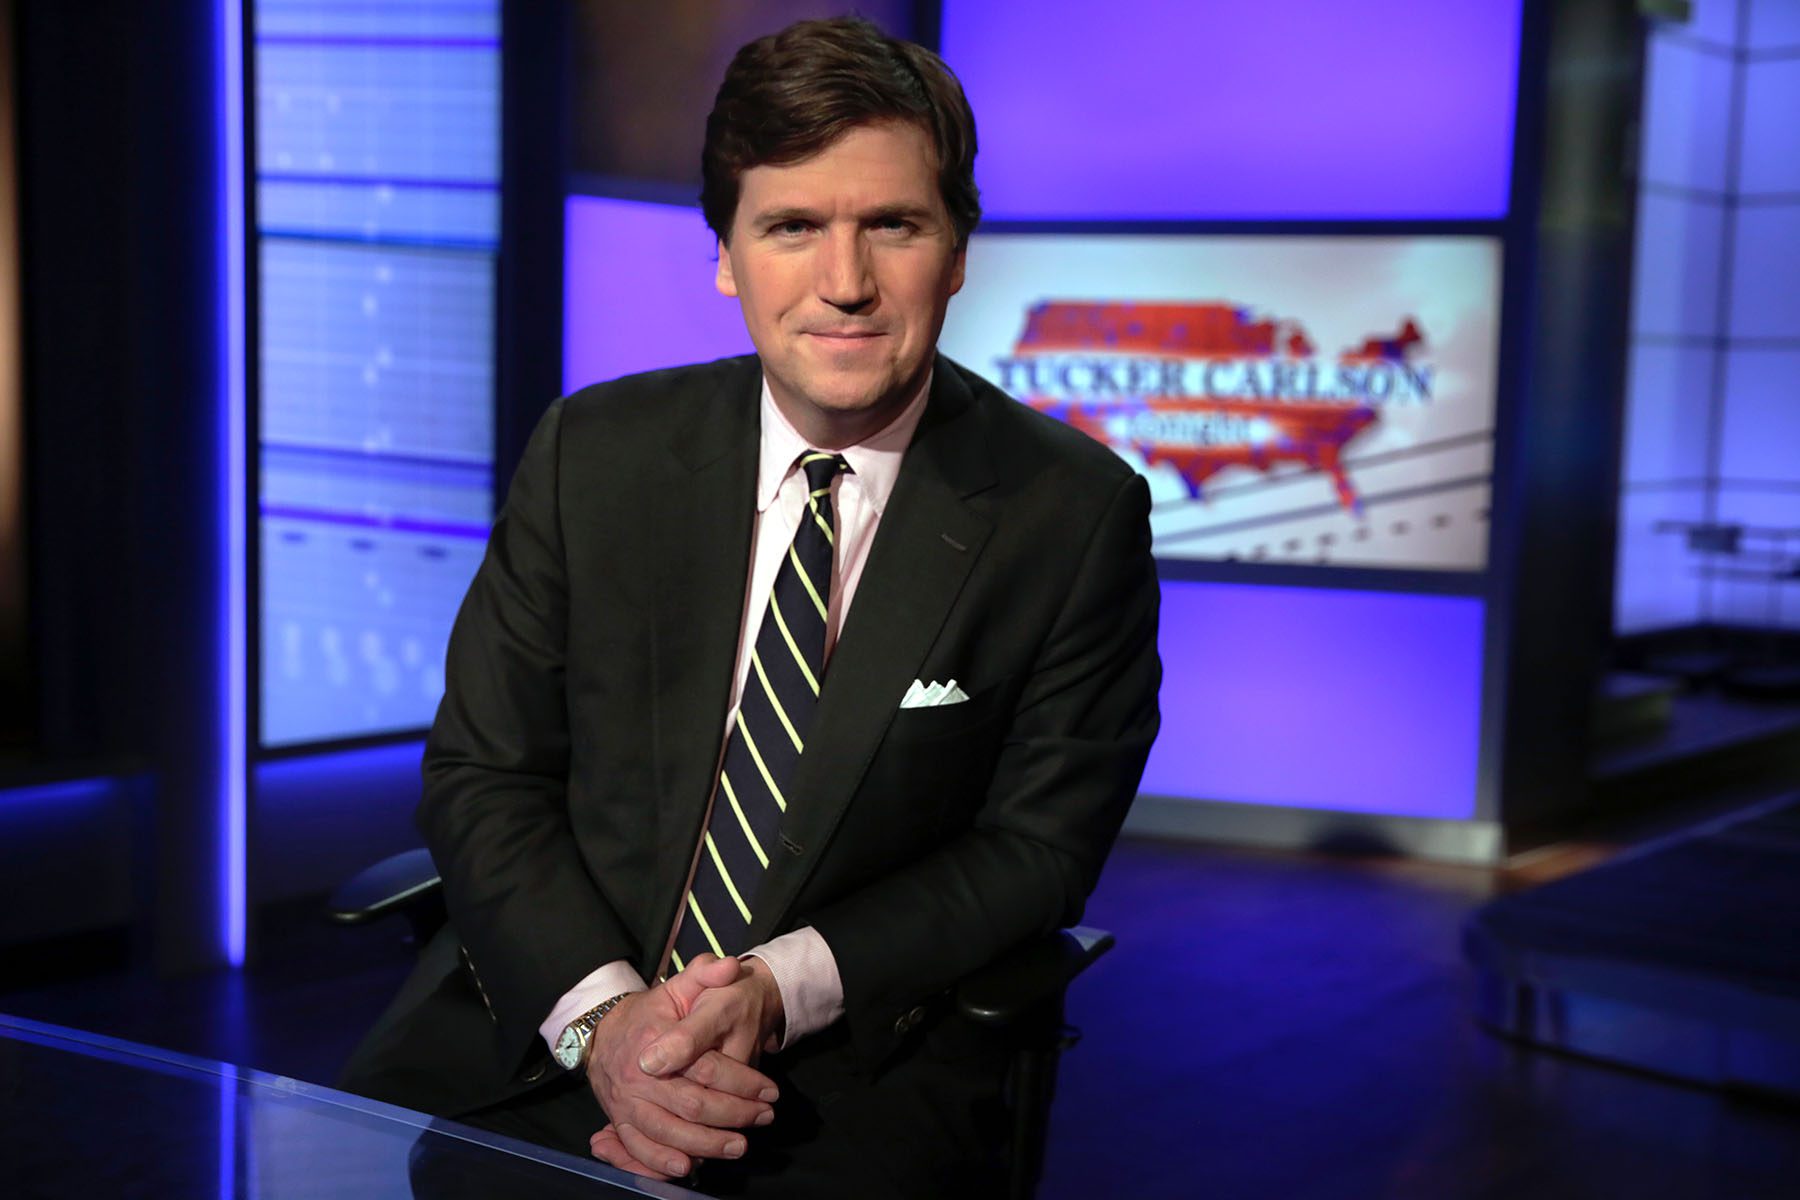 Tucker Carlson poses for photos in a Fox News Channel studio in New York City.